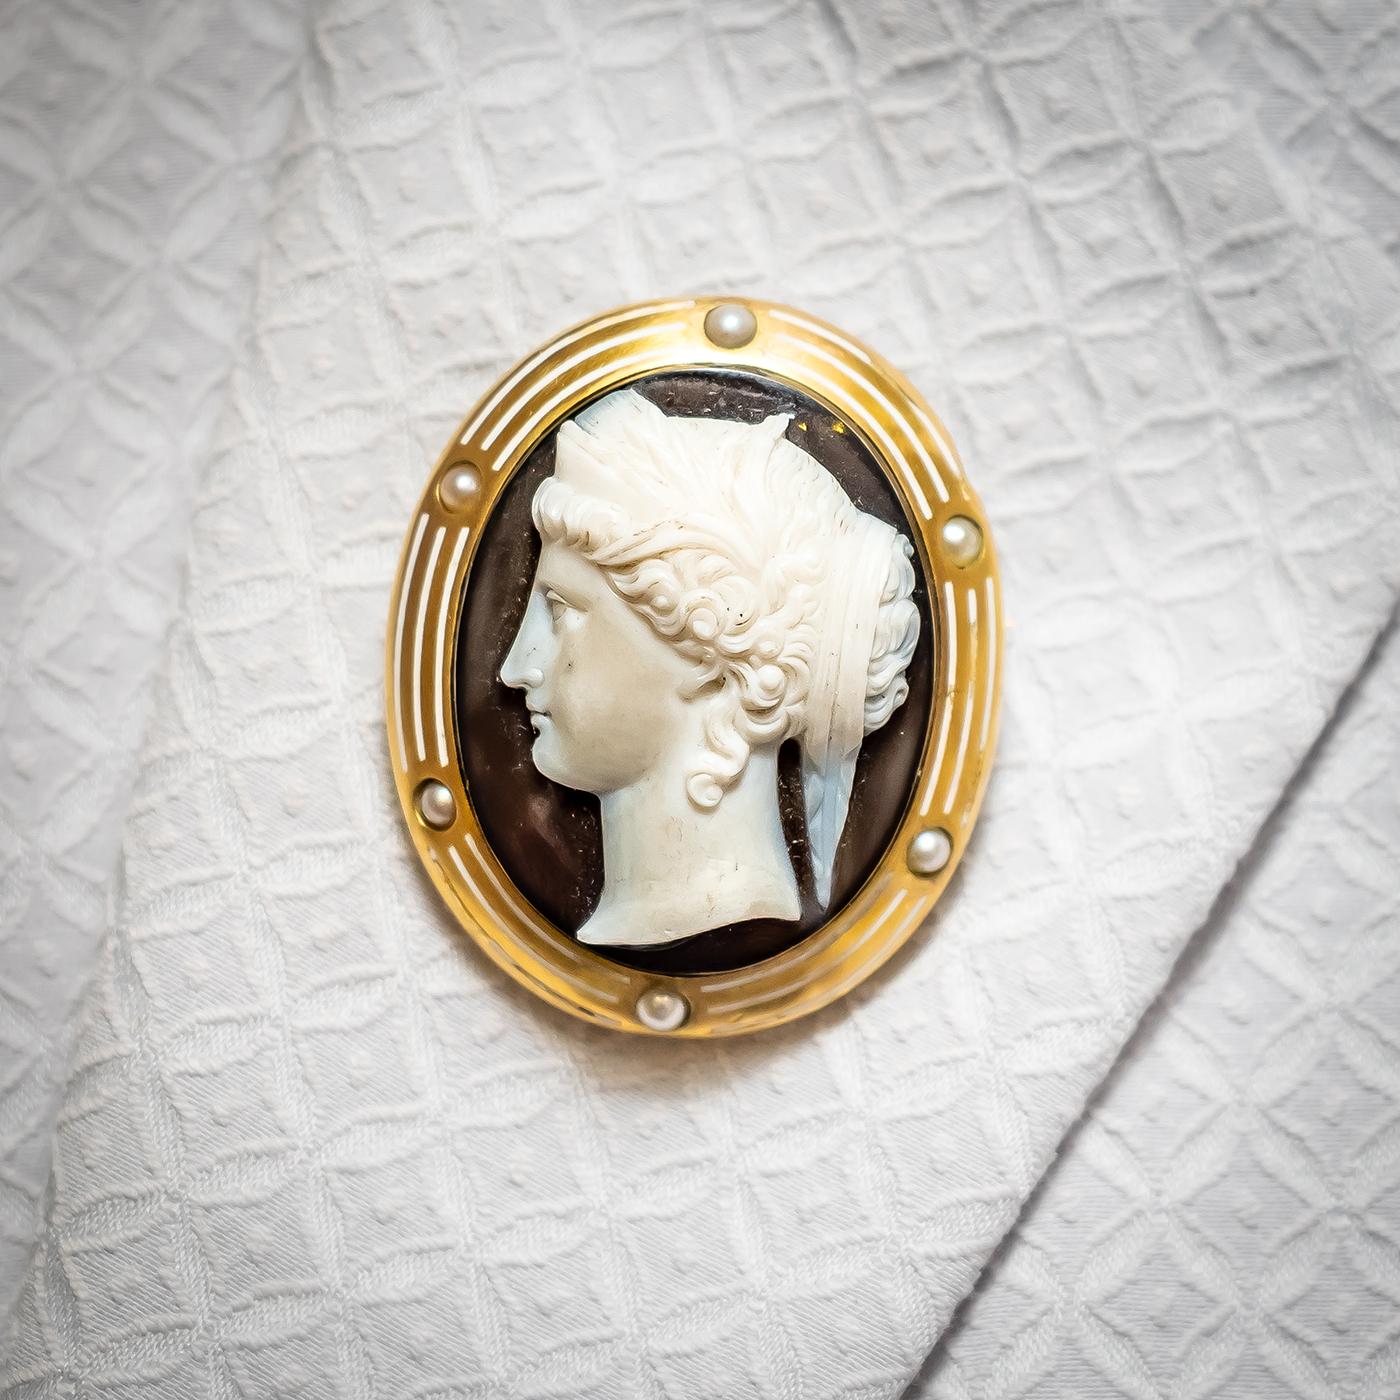 An antique cameo brooch, depicting Hera, the ancient Greek goddess of women, marriage and childbirth, on a sardonyx hardstone cameo, with a dark brown background, mounted in yellow gold surround, set with six, natural half pearls, spaced between